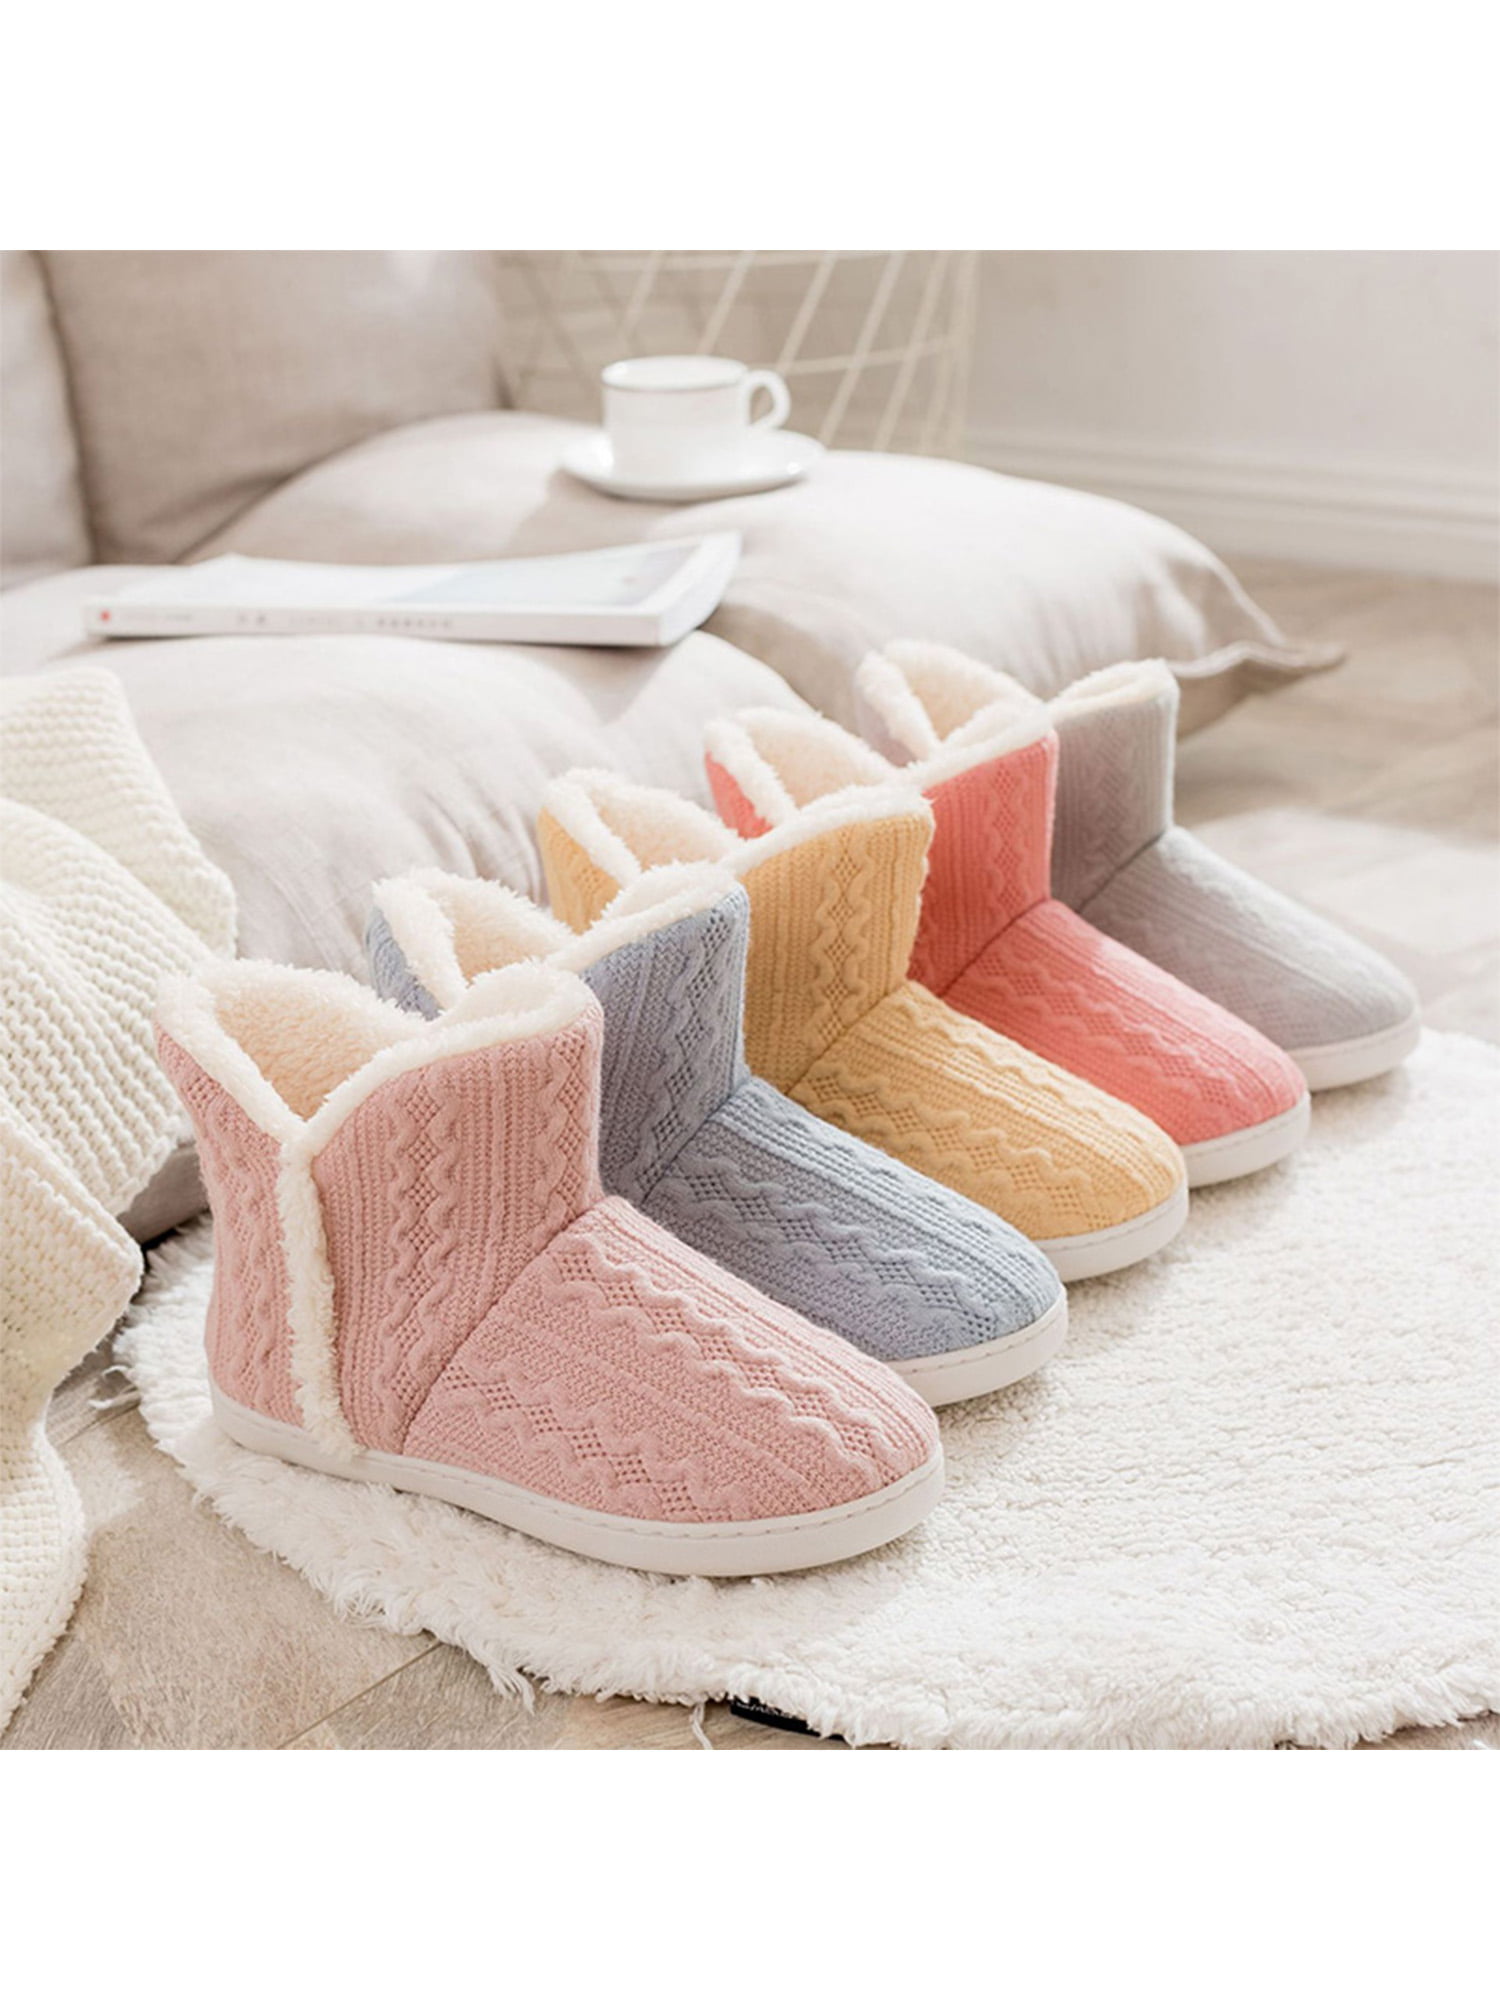 Womens Cozy Ankle High Bootie Slippers Soft Fuzzy Memory Foam Boots House  Shoes | eBay